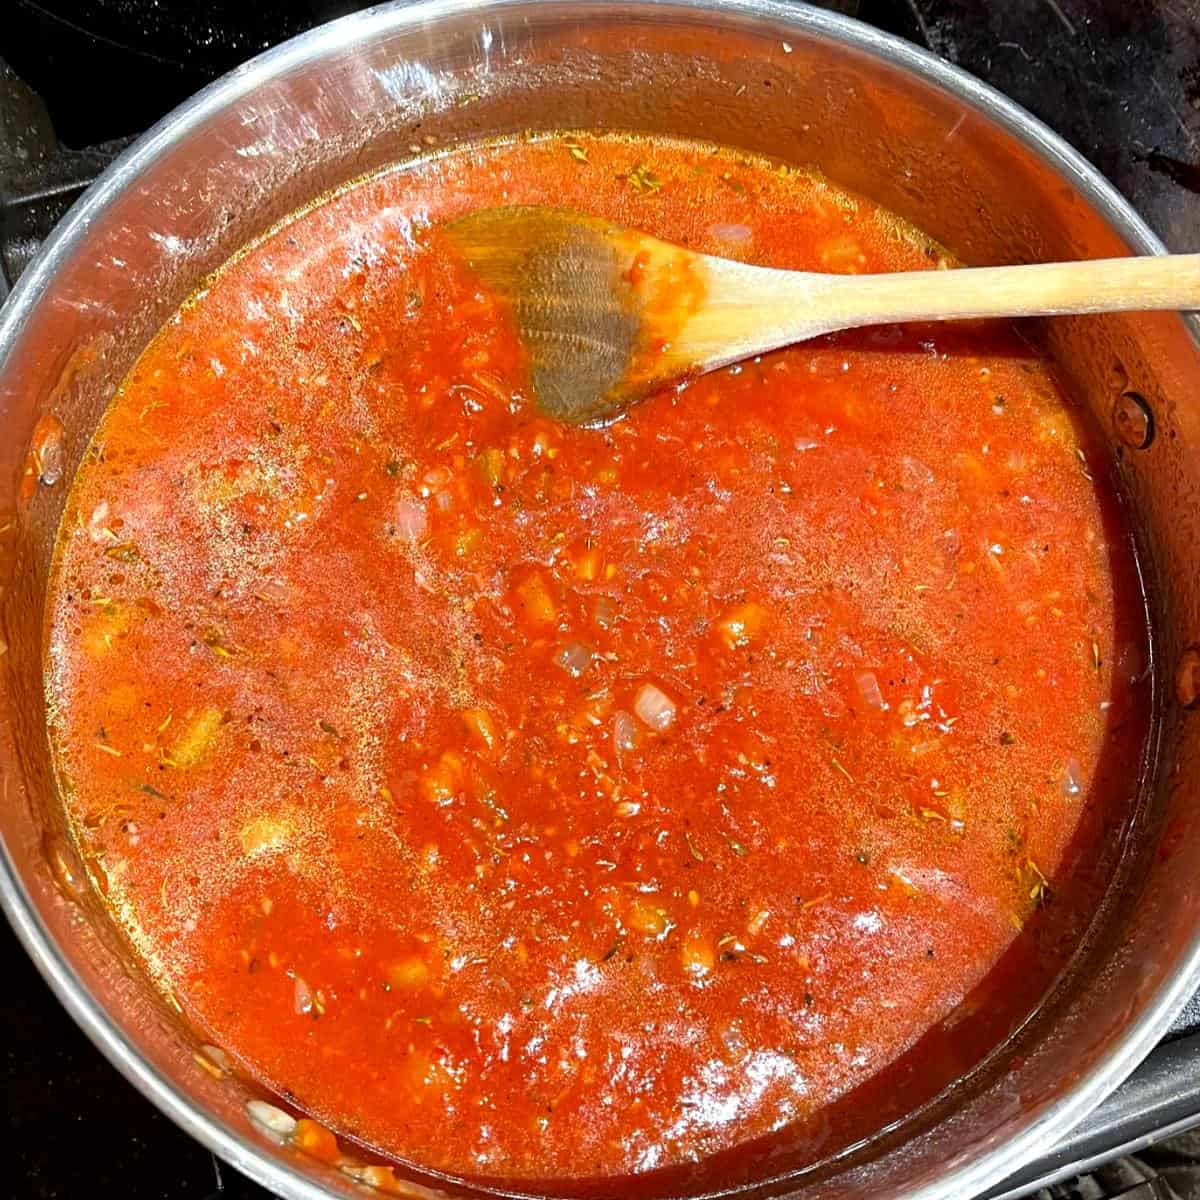 Stock added to tomatoes in saucepan.